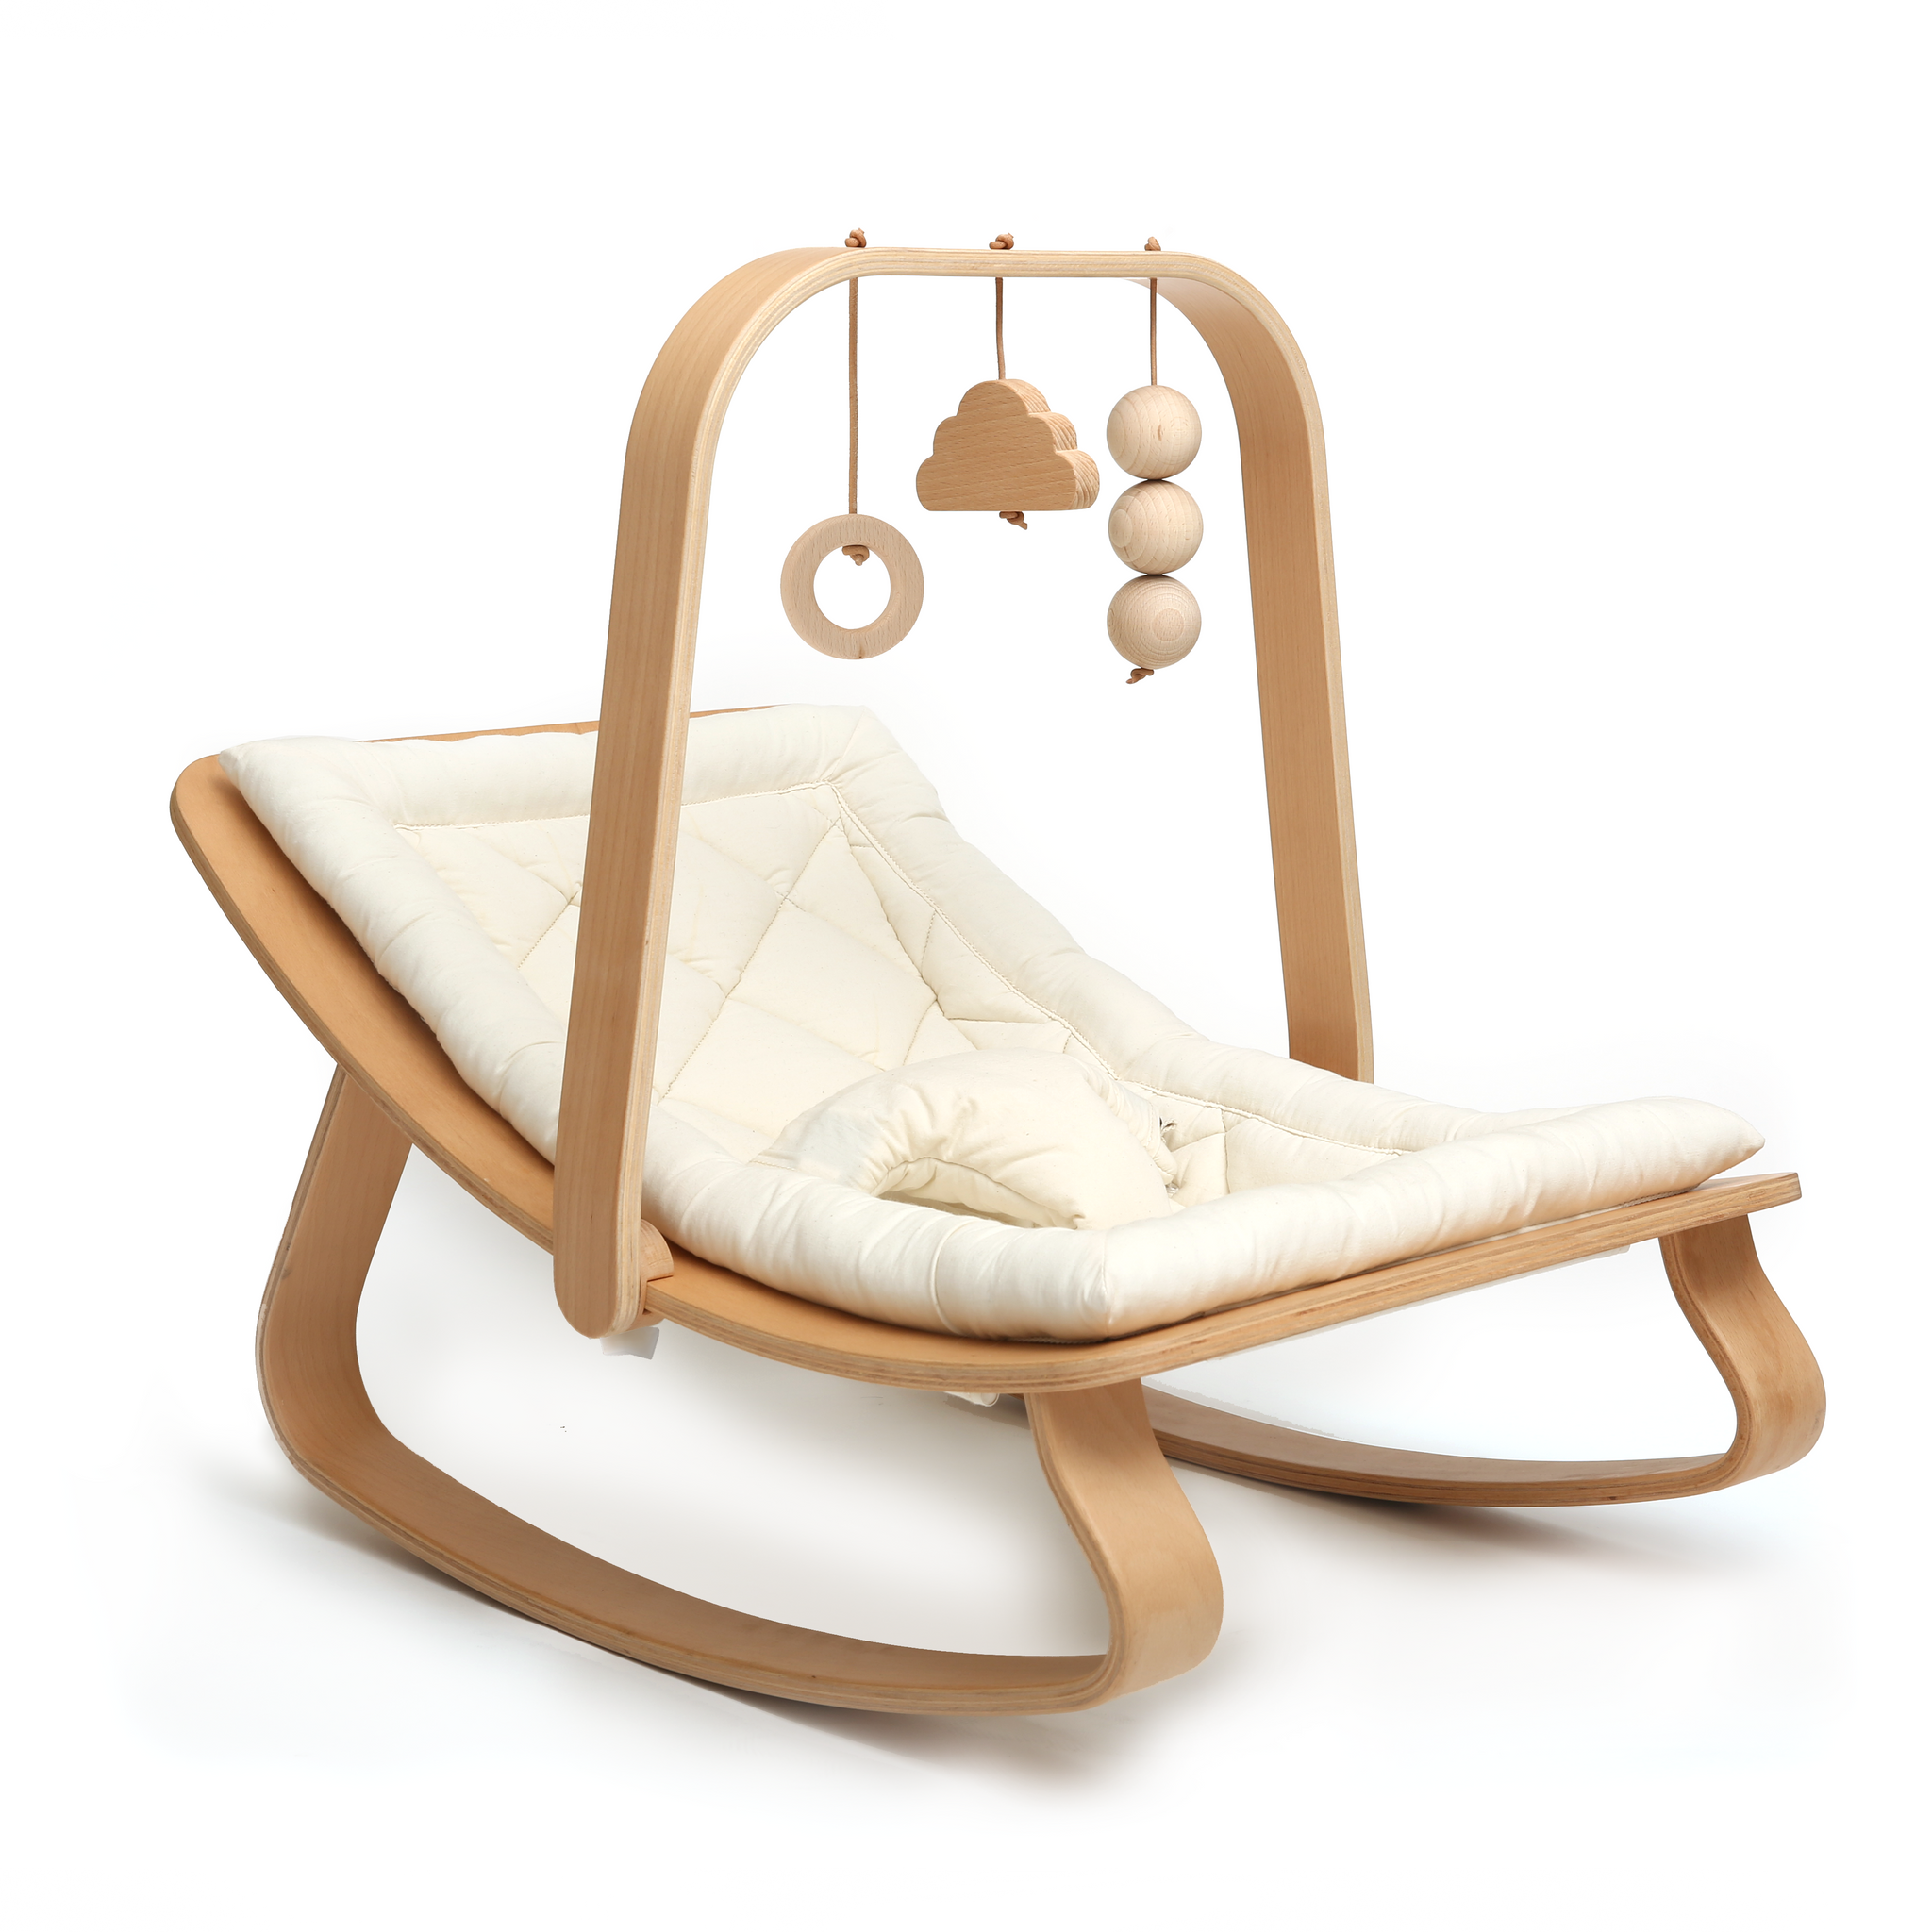 Designed especially to attach to the Charlie Crane Levo Rocker the wooden Activity Arch is ideal to stimulate babies from birth. The natural wooden toys; cloud, ring and beads will entertain your child in their Levo Rocker.